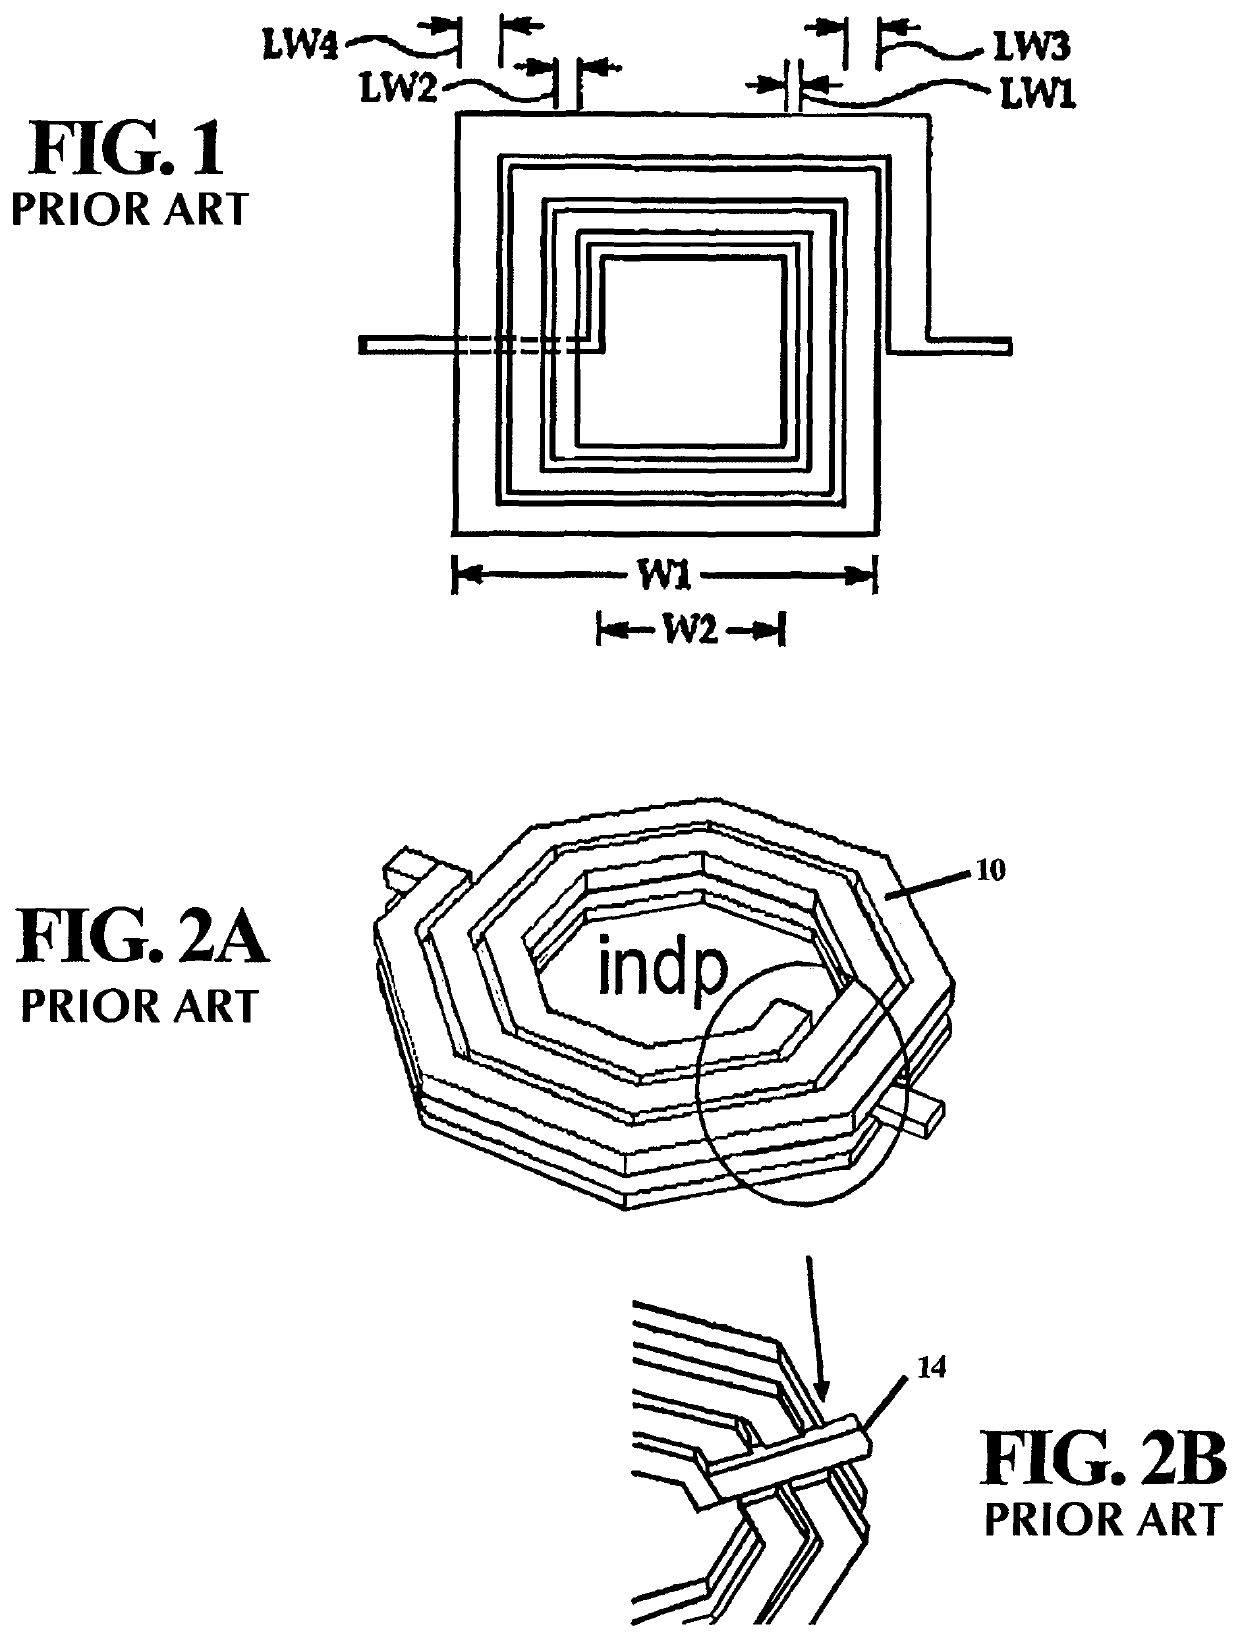 Parallel stacked inductor for high-Q and high current handling and method of making the same